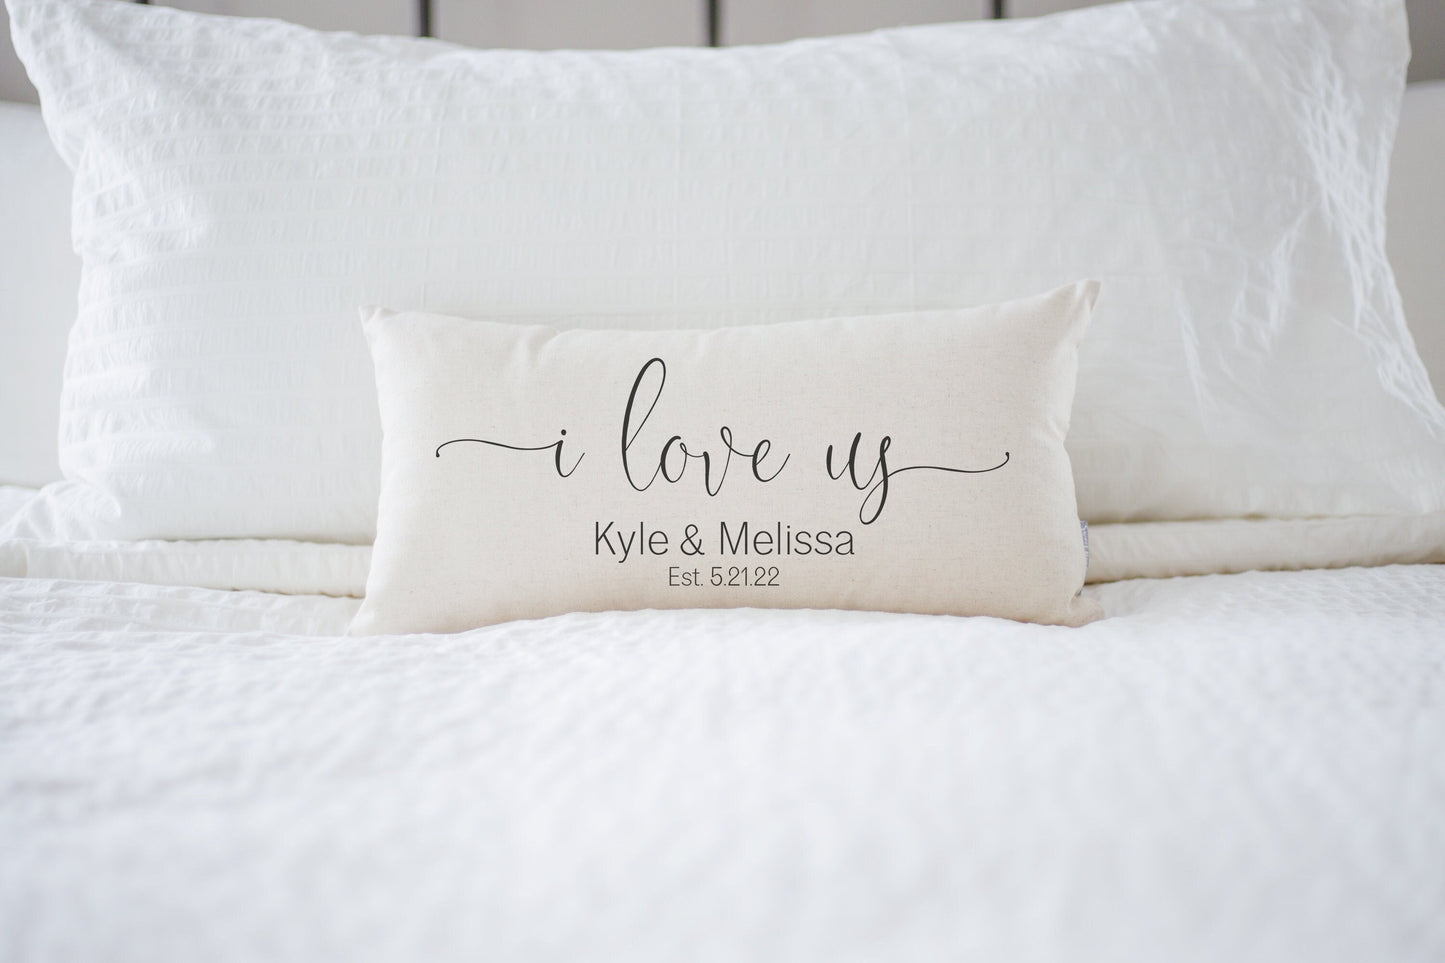 Load image into Gallery viewer, Wedding Gift Pillow | Wedding Gift Personalized Pillow | Newlywed Gift | Engagement Gift | Rustic Wedding Gift | Linen Pillow Gift for Bride
